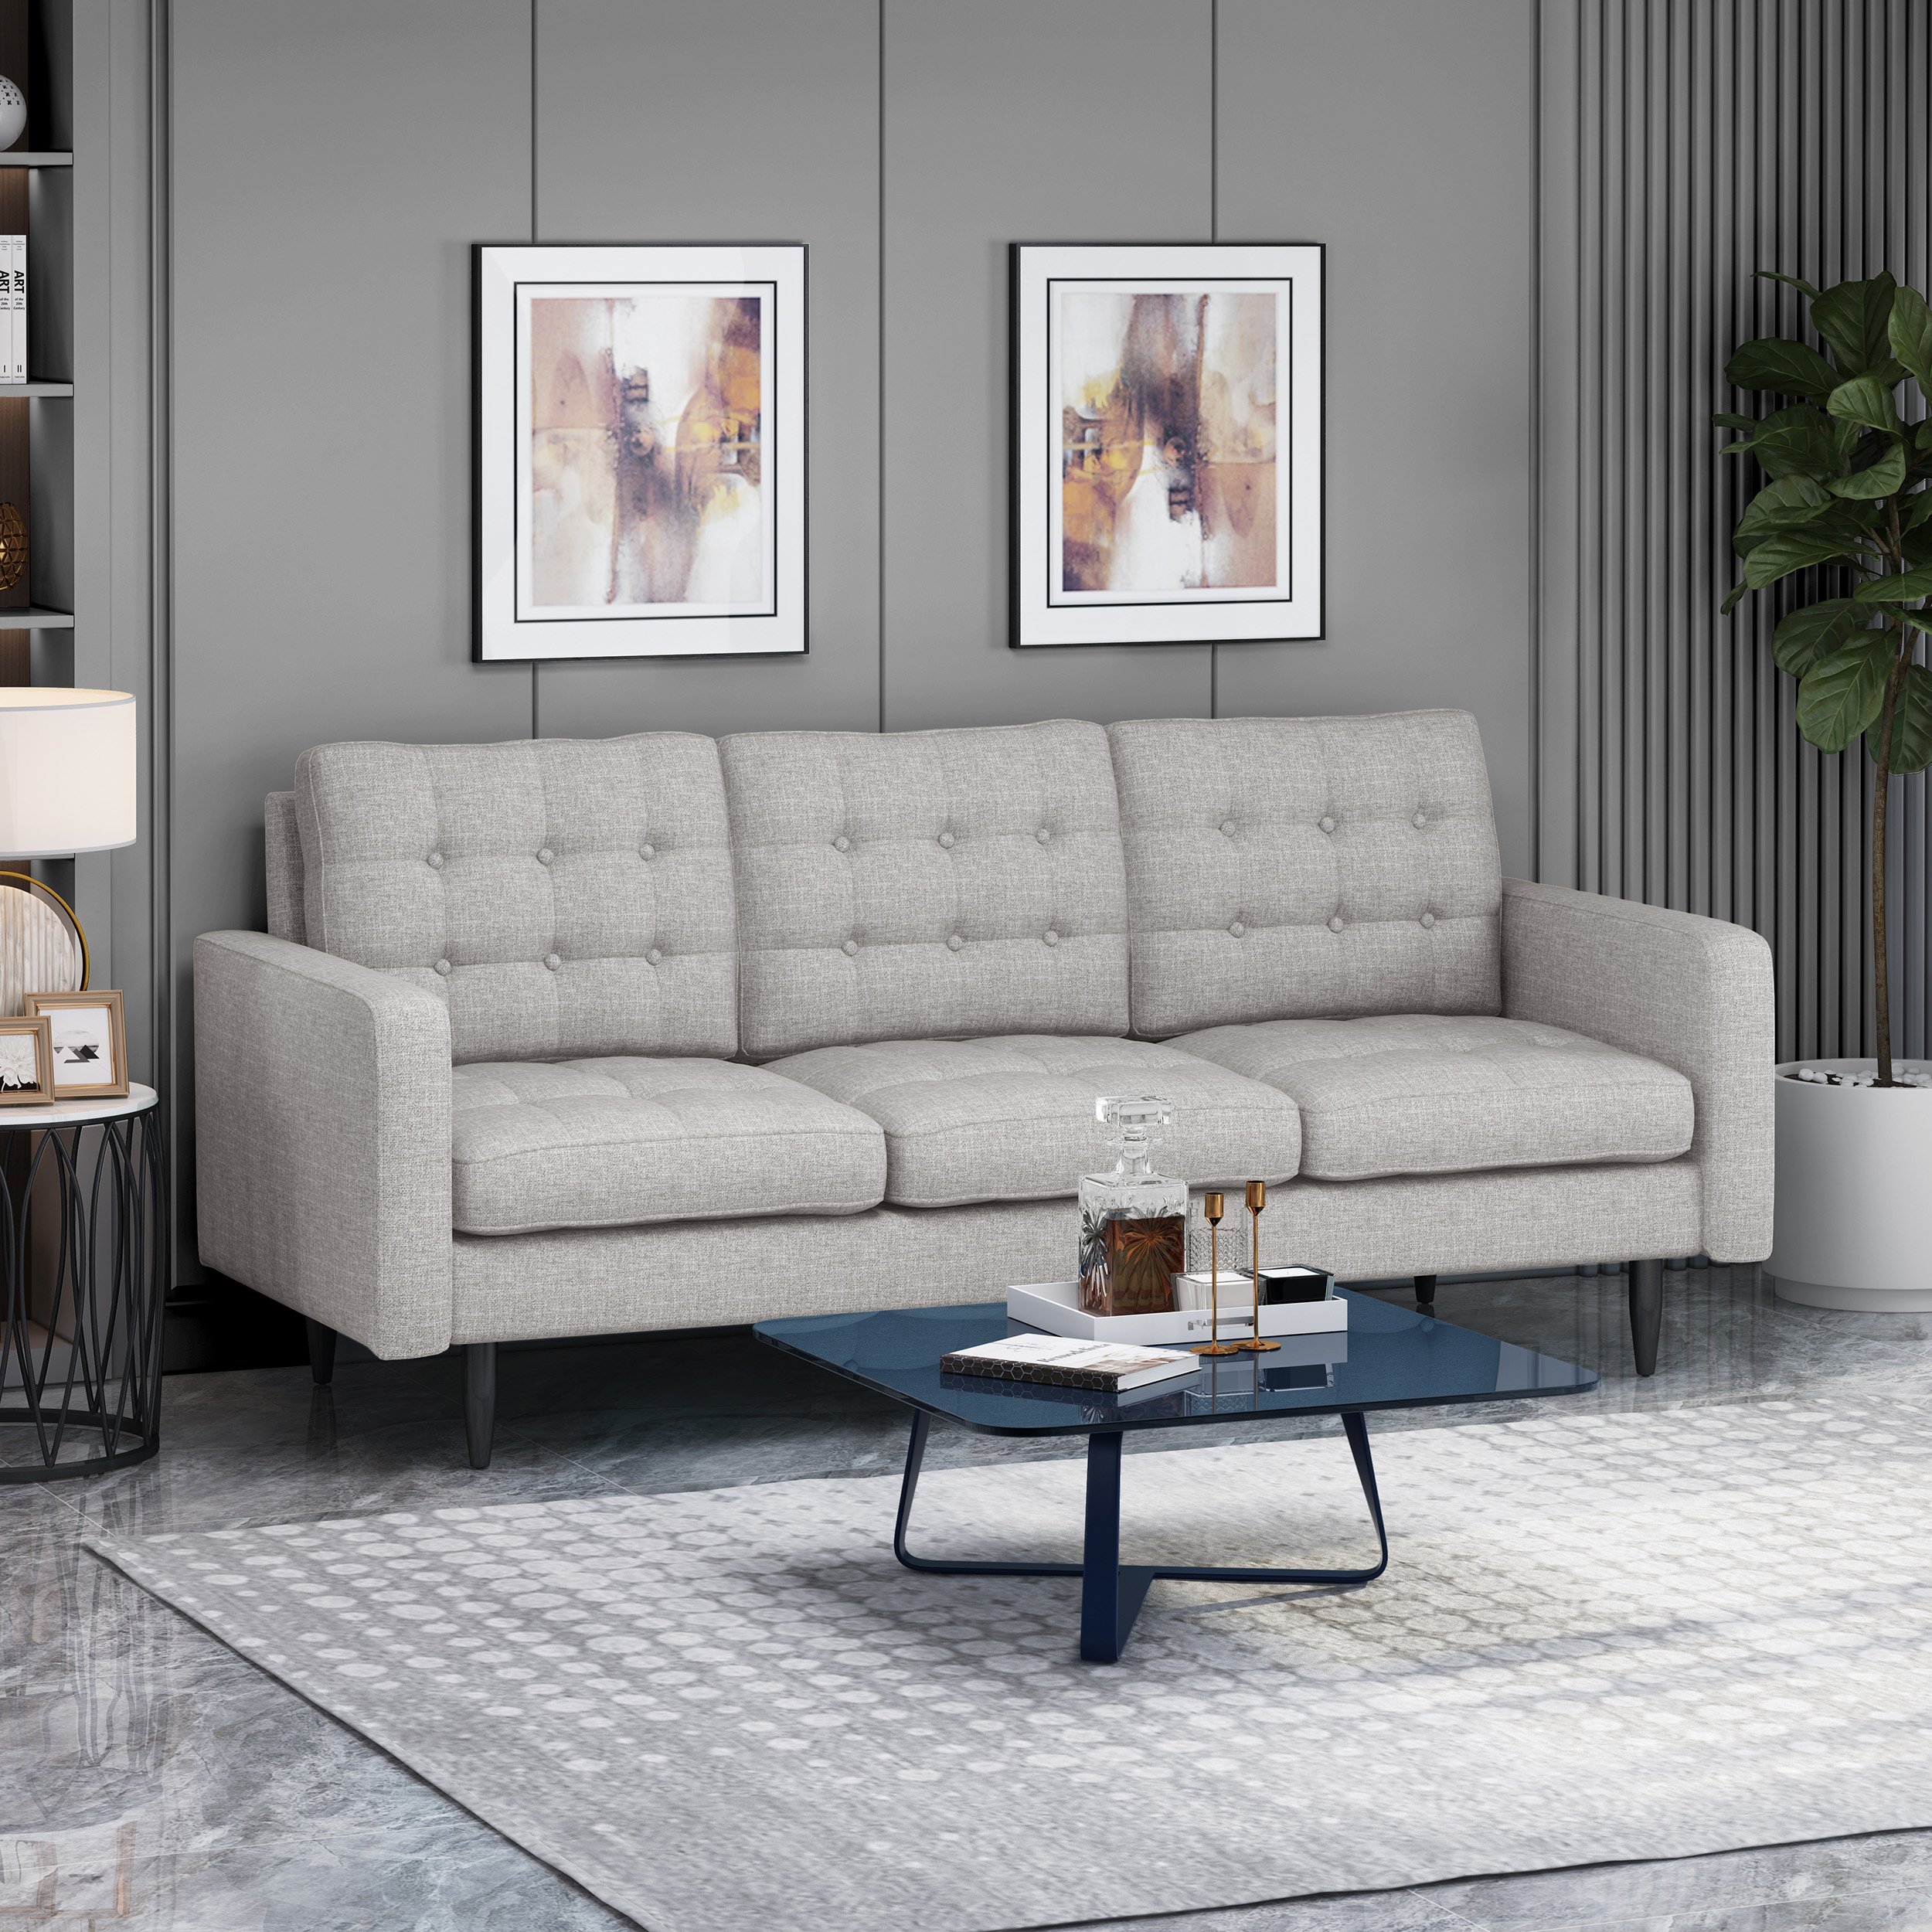 Jenny Contemporary Tufted Fabric 3 Seater Sofa - Blue + Dark Brown